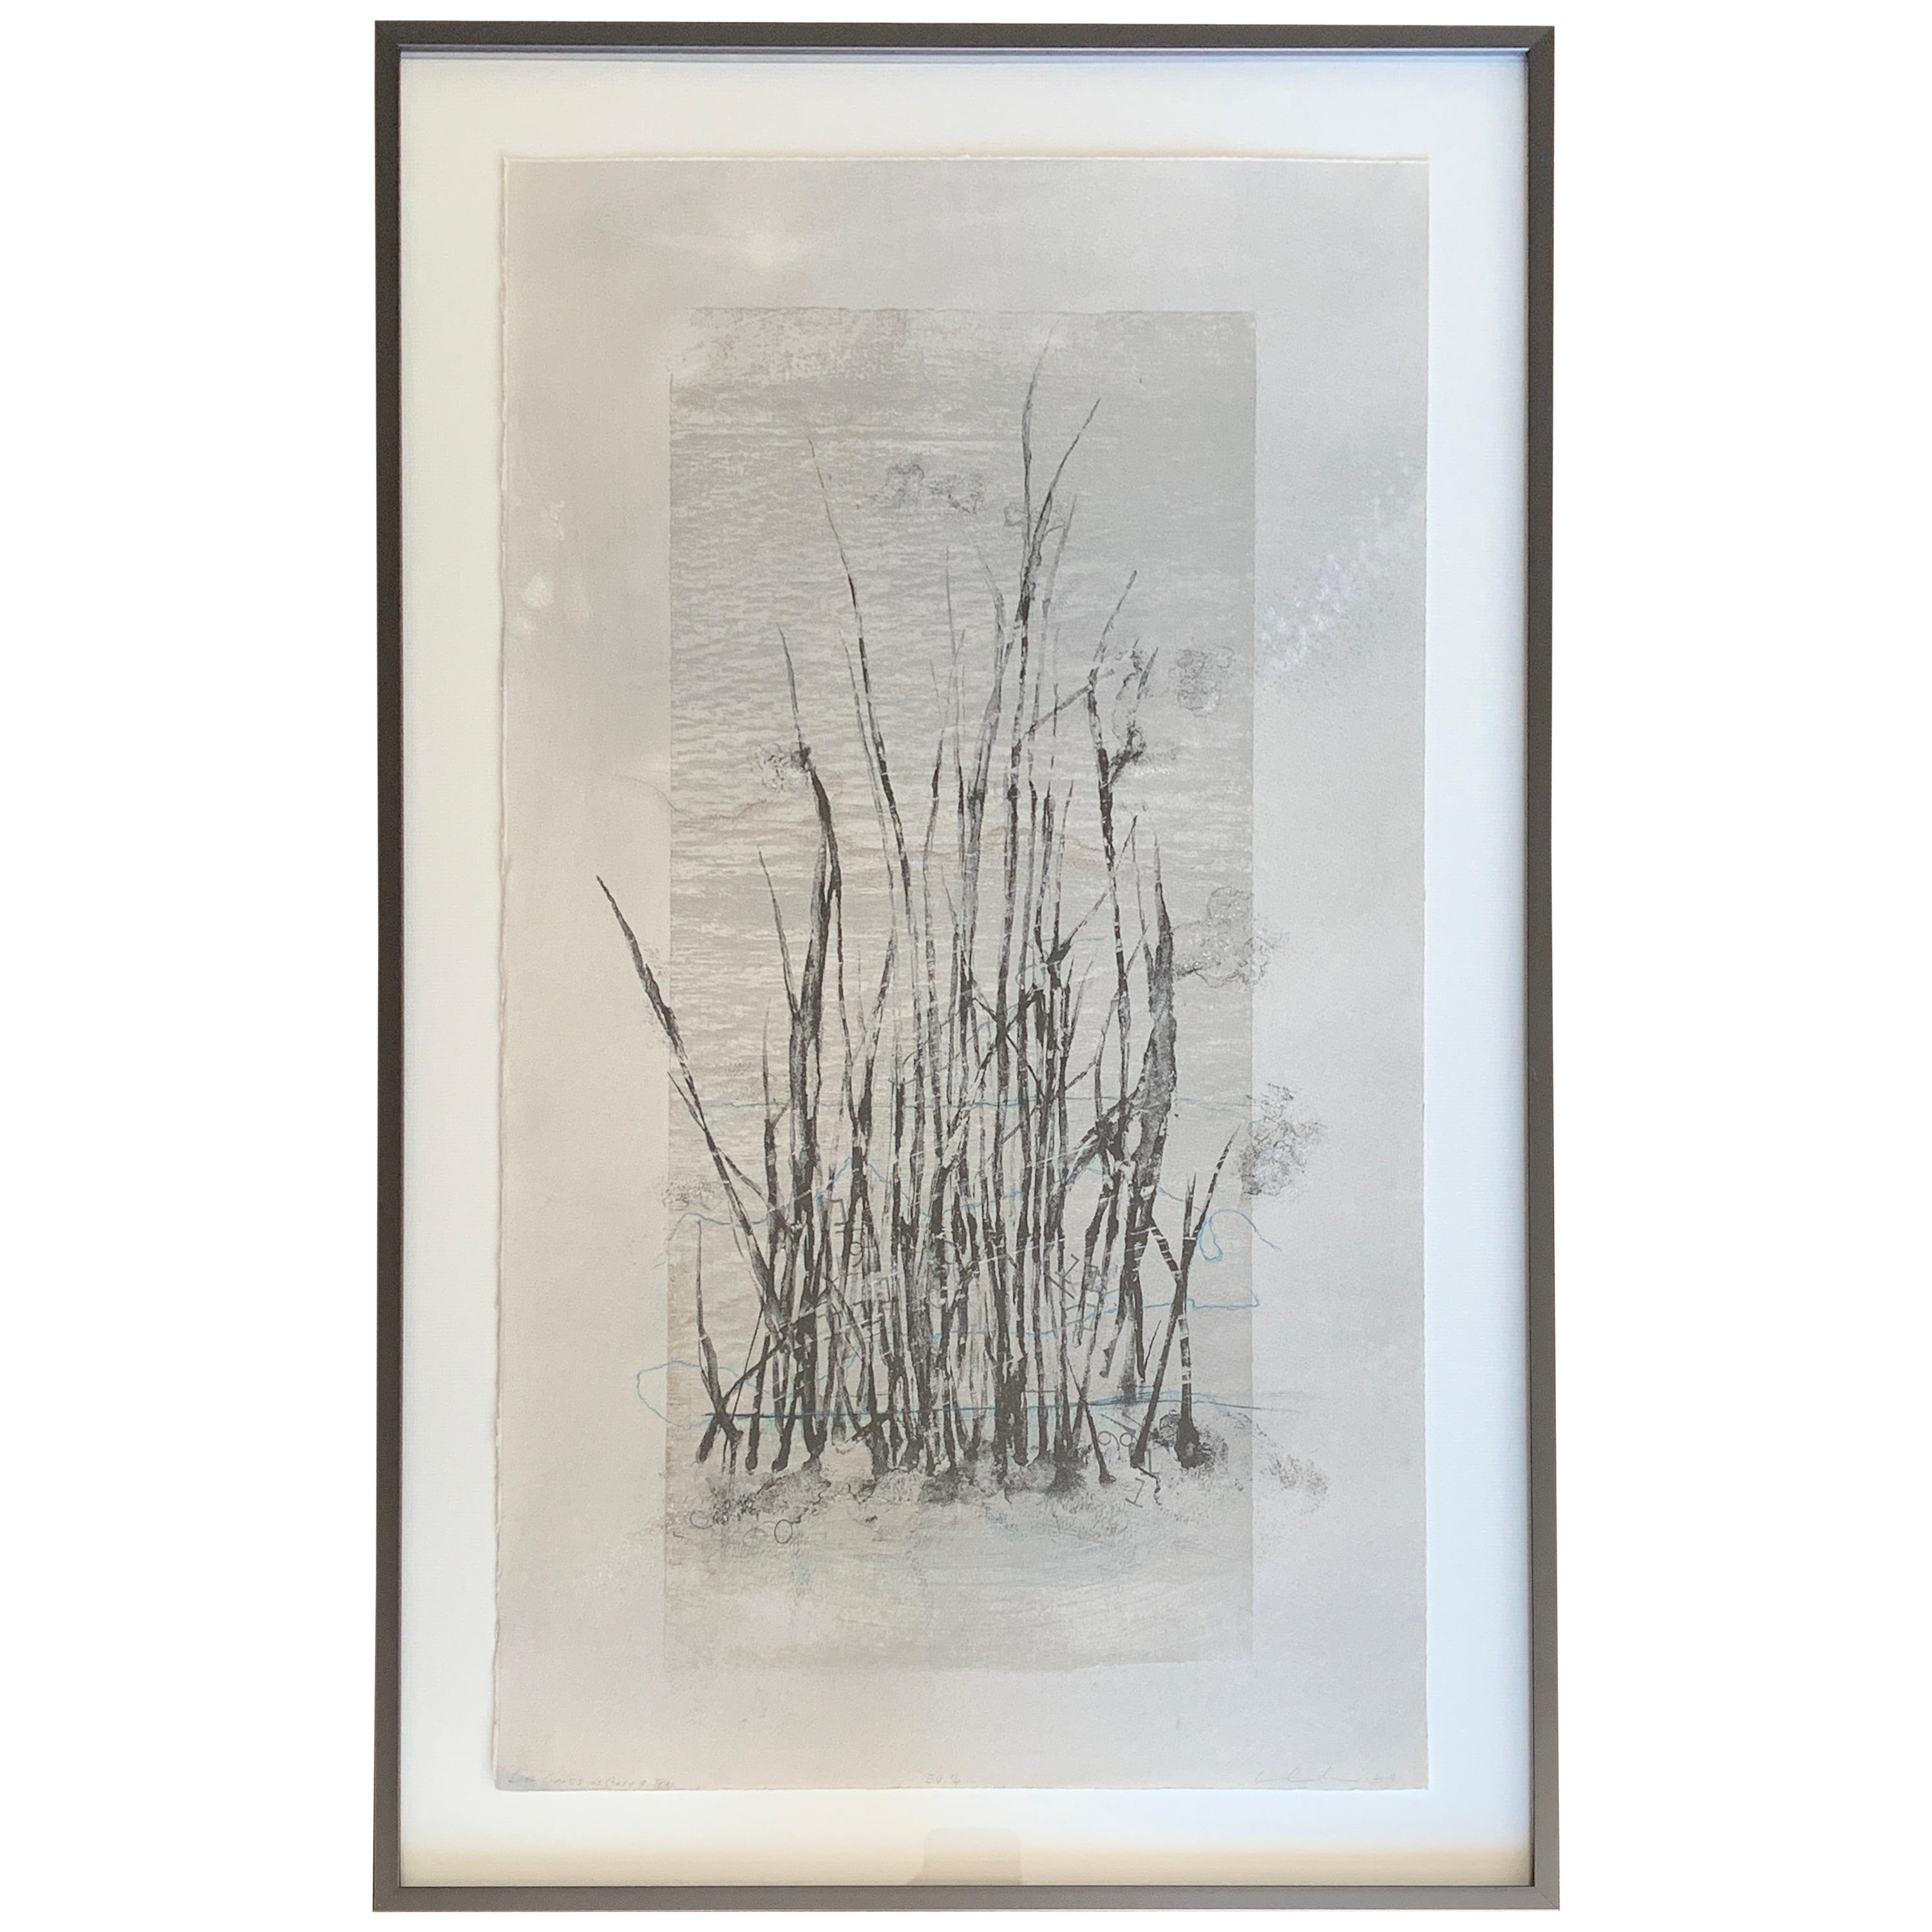 'Bog Grass' 1/4 Photolithograph Mixed-Media by Laurie Carnohan, 2019